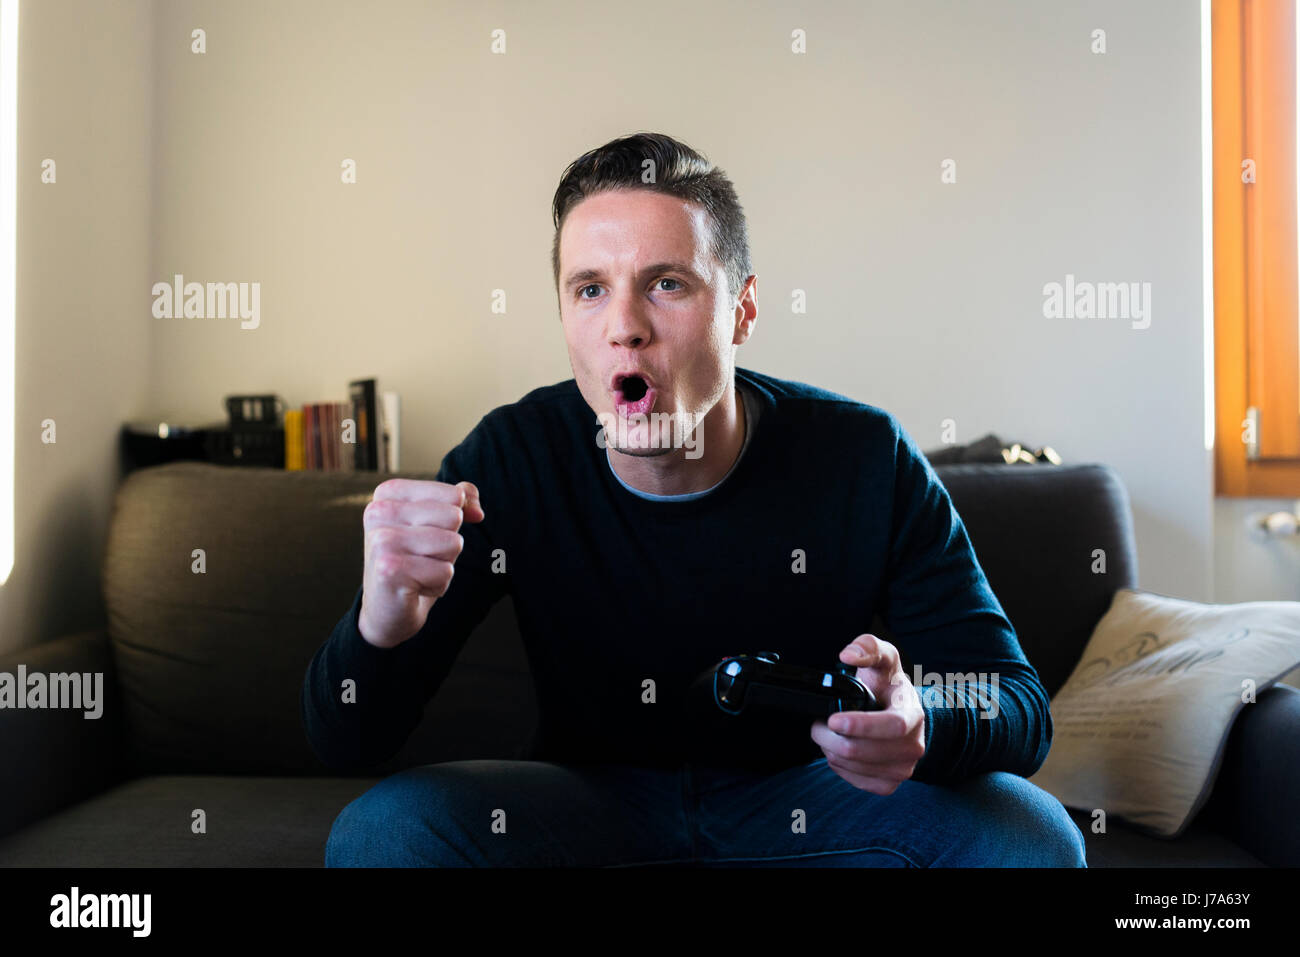 Portrait of screaming man sitting on the couch with games console Stock ...